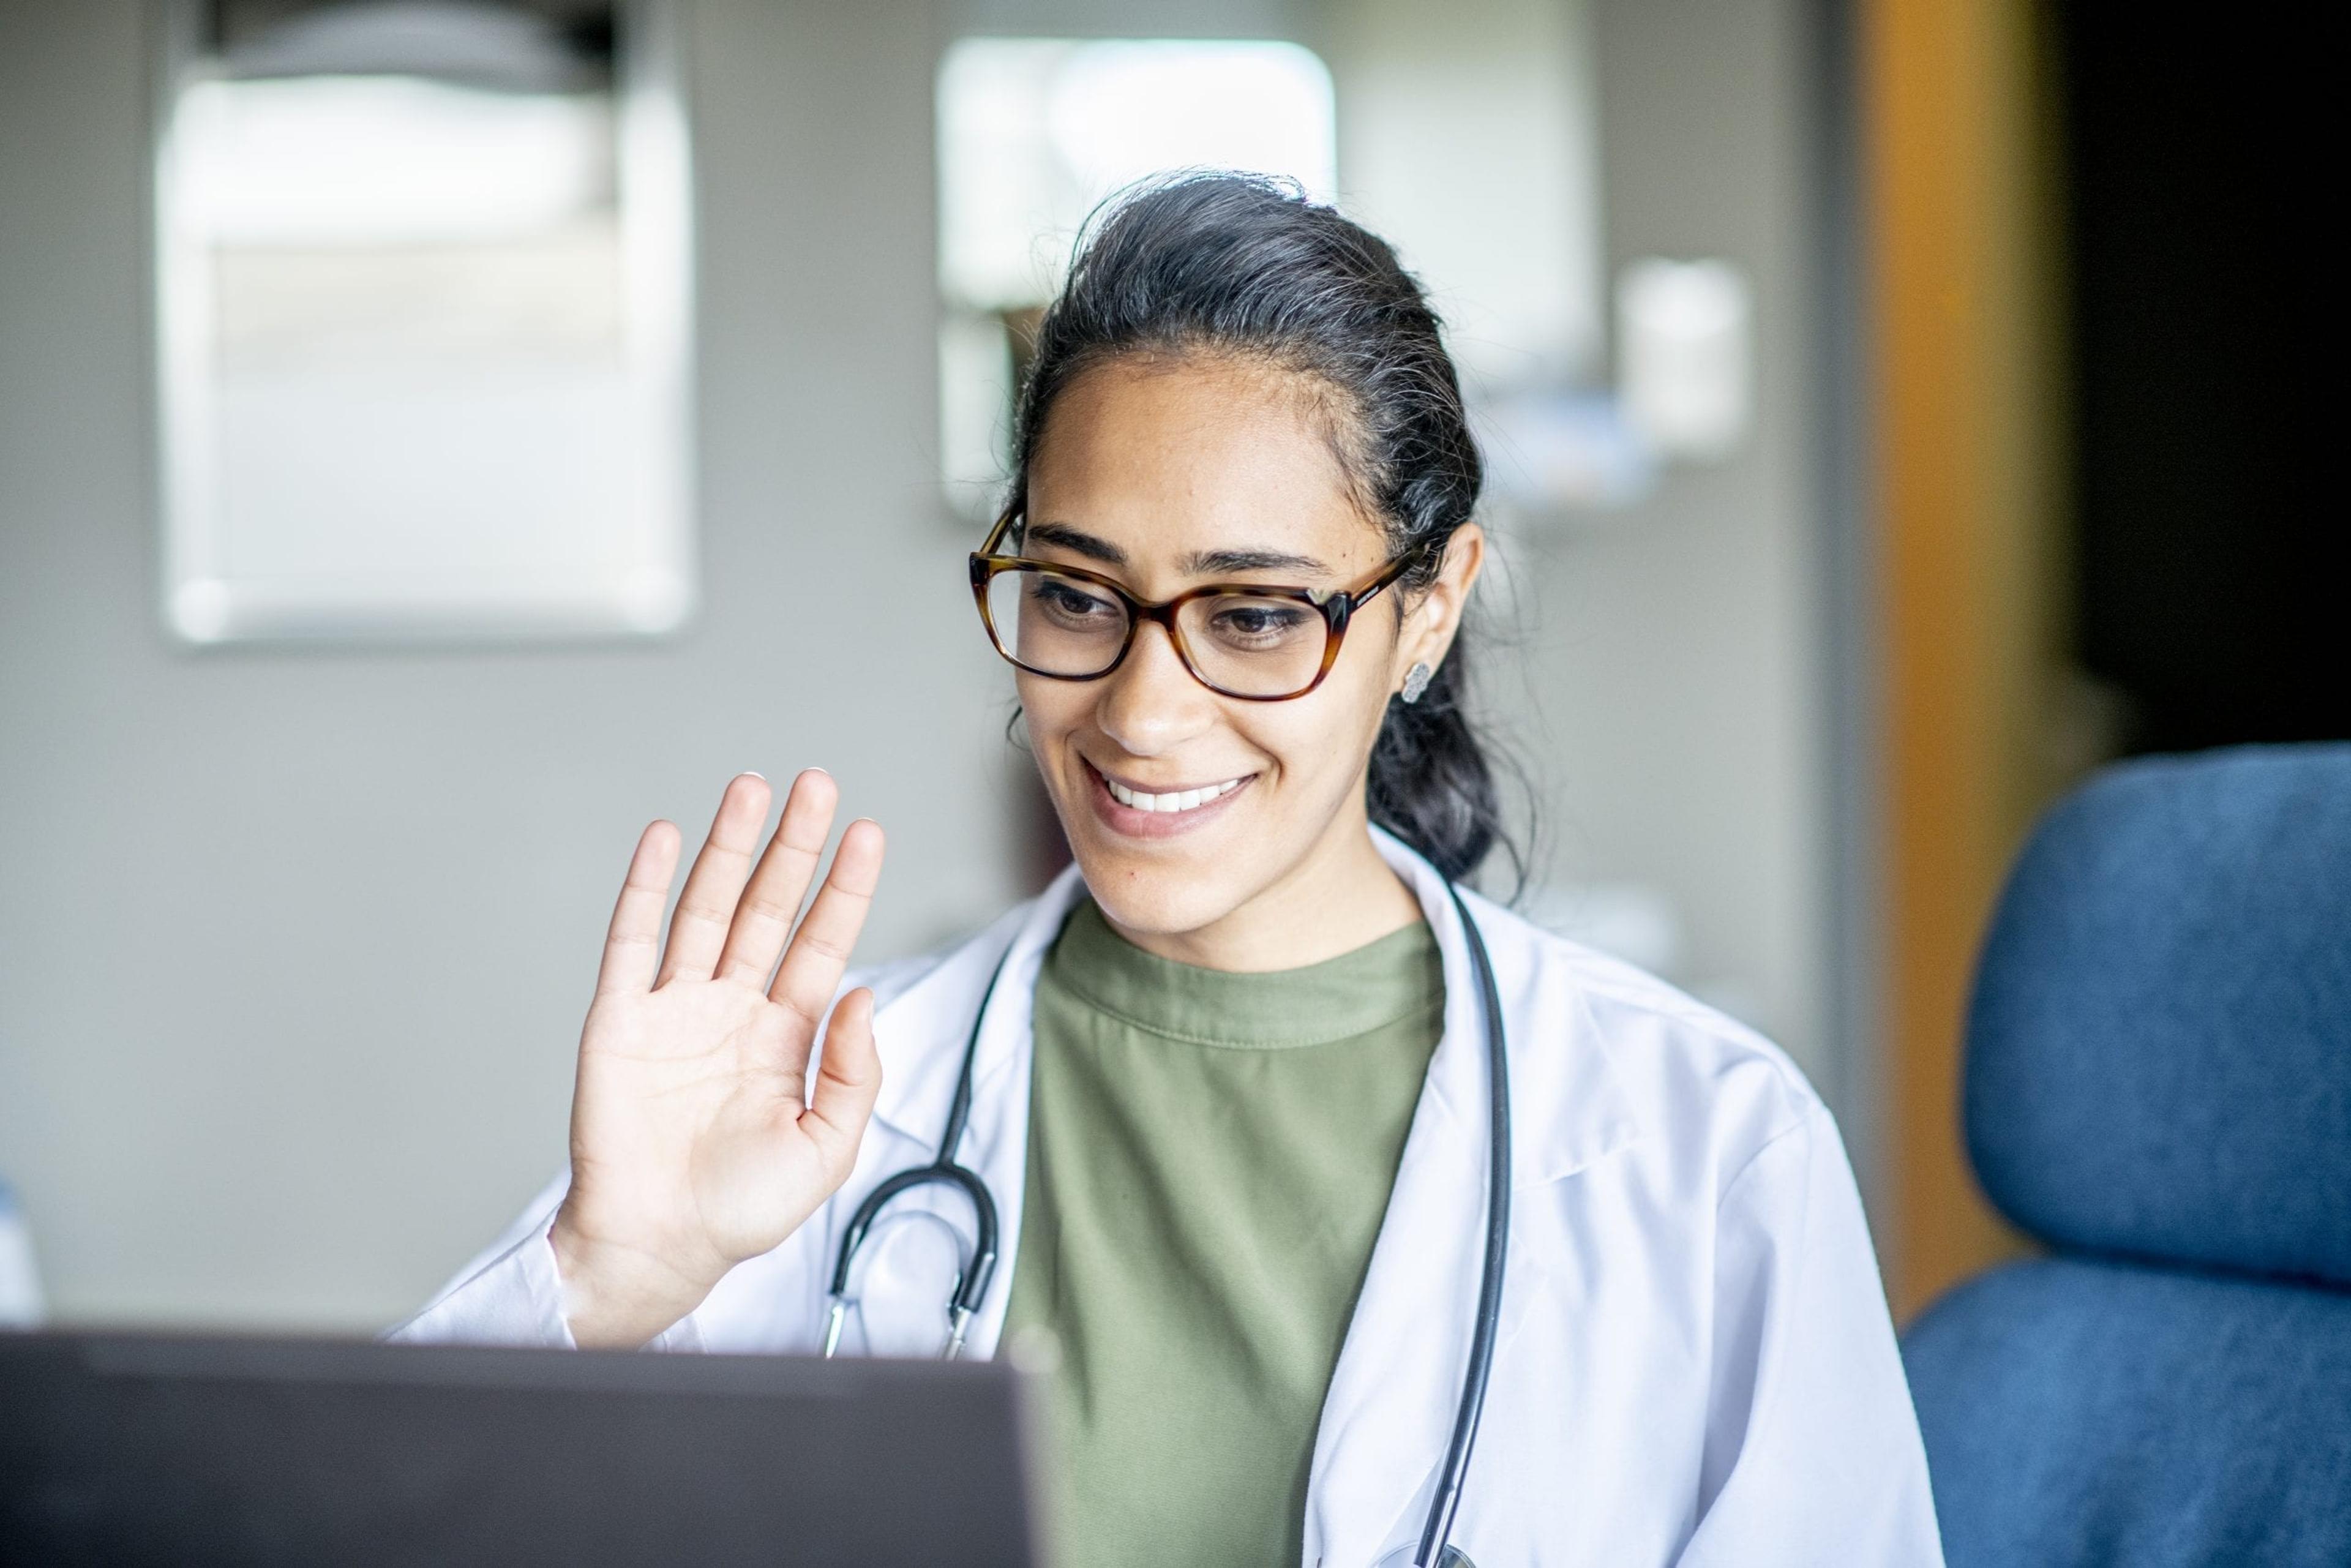 Doctor waving at a virtual patient